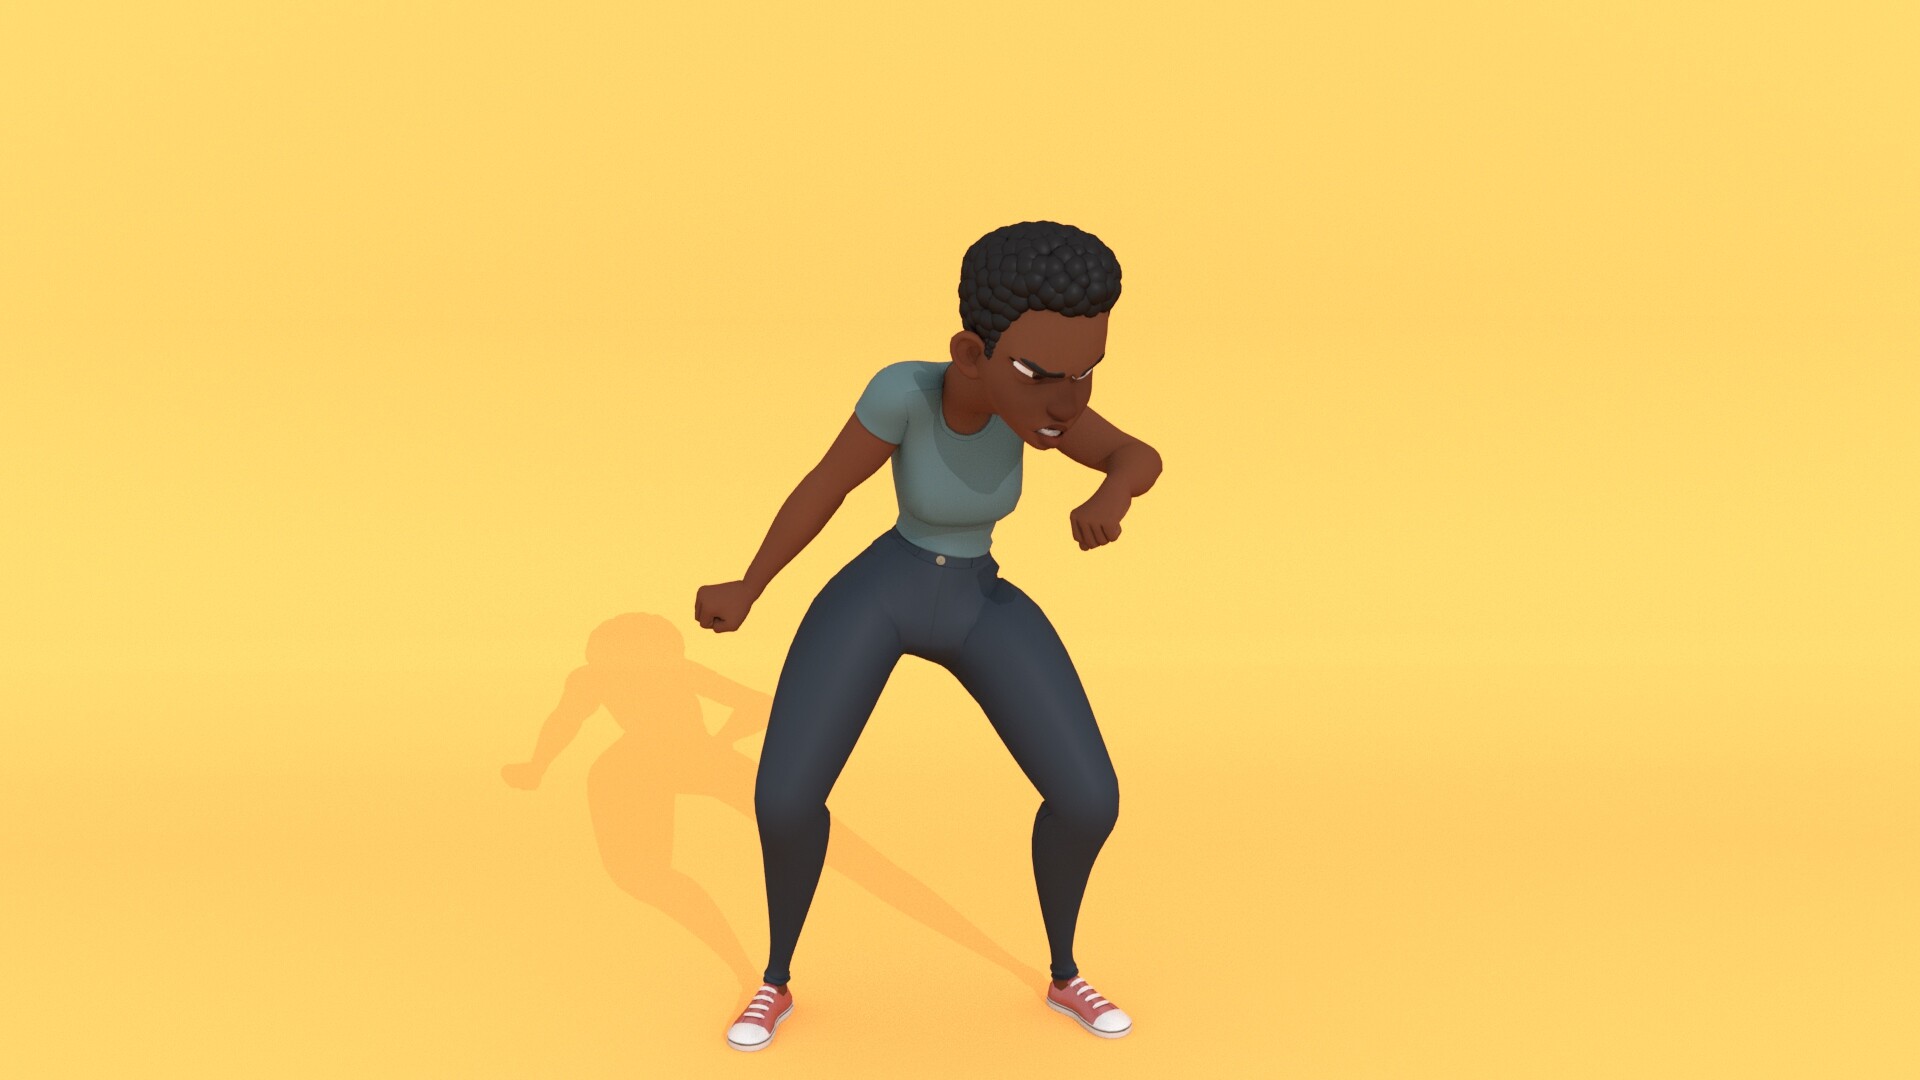 A person running pose - CLIP STUDIO ASSETS